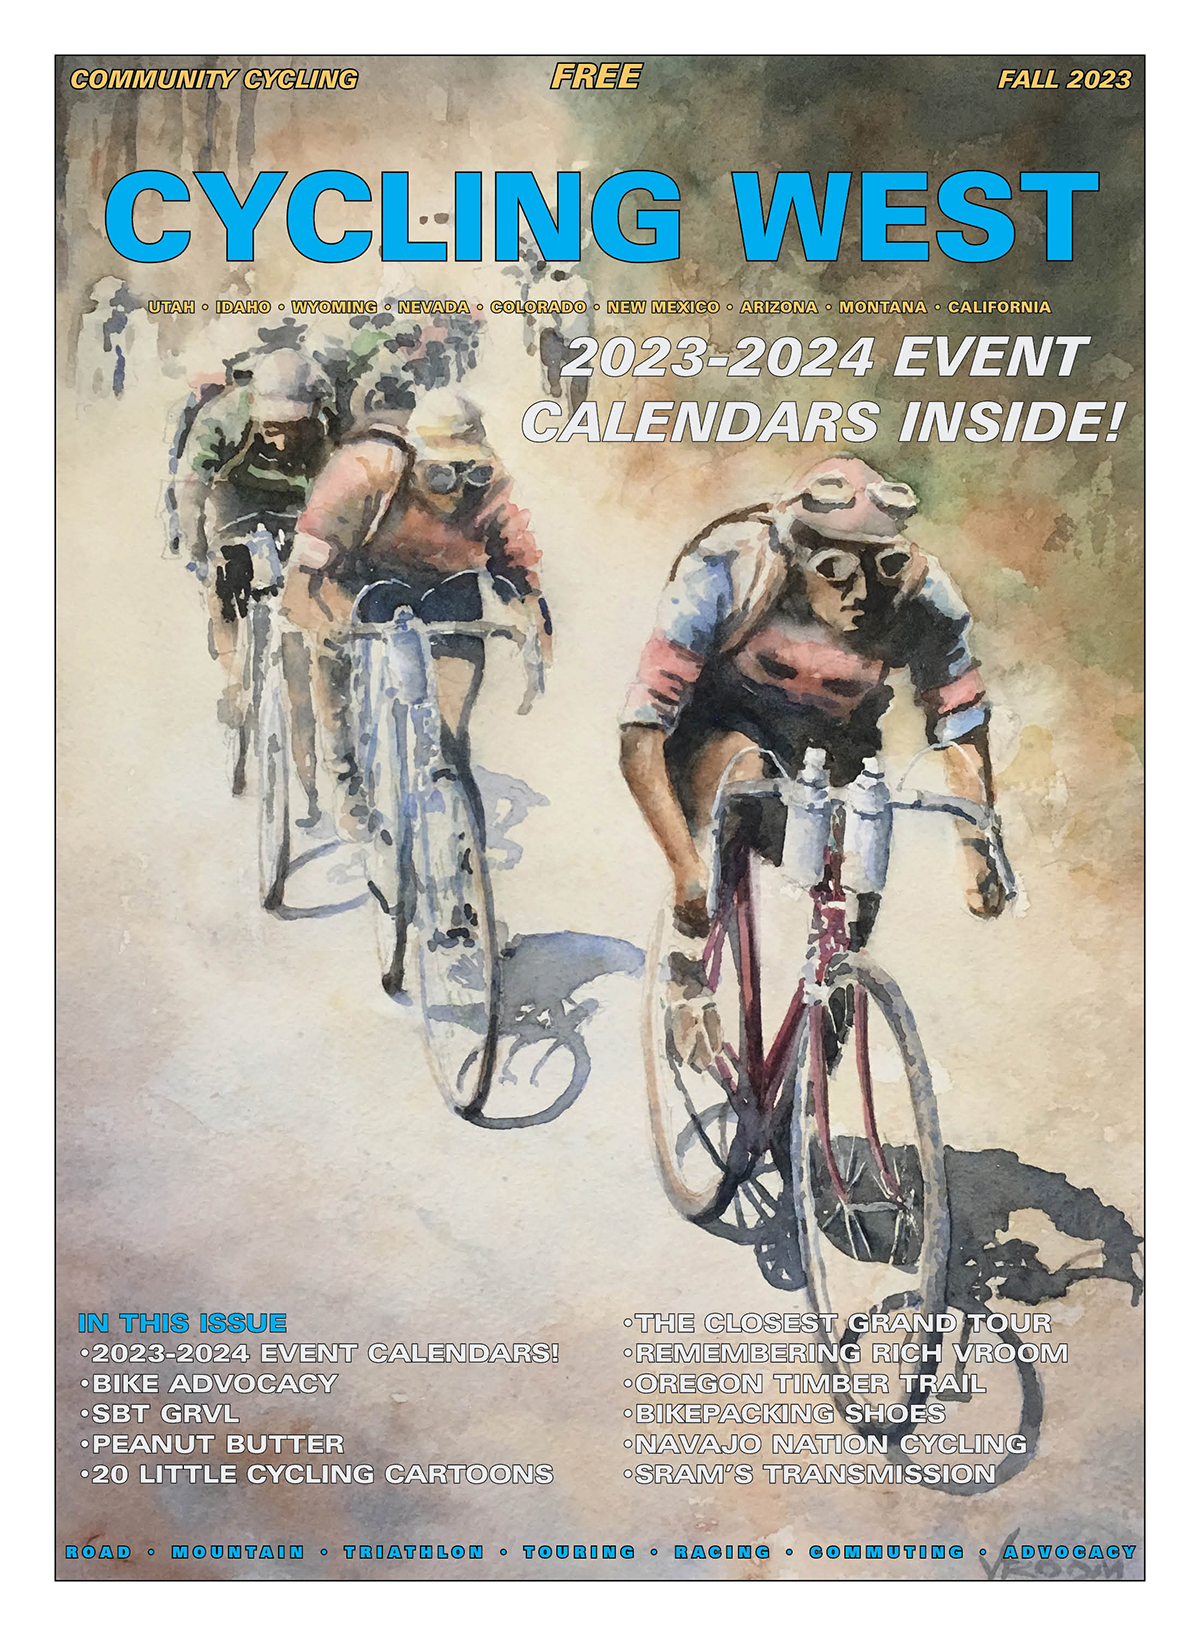 Cycling West Fall 2023 Issue Cover Art: Vintage Bike Racing. Watercolor by Rich Vroom Title: Untitled Medium: Watercolor on paper. Rich Vroom was a watercolor artist based in Salt Lake City, Utah. His studio is in Sugarhouse where he taught classes, paints, and bike races. He also taught at the University of Utah. Rich passed away in 2023. See a remembrance of Rich elsewhere in this issue. Prints may be available for purchase. Contact: richvroom@msn.com Follow Rich on Instagram @richvroom or on Facebook: Rich Vroom Watercolors.